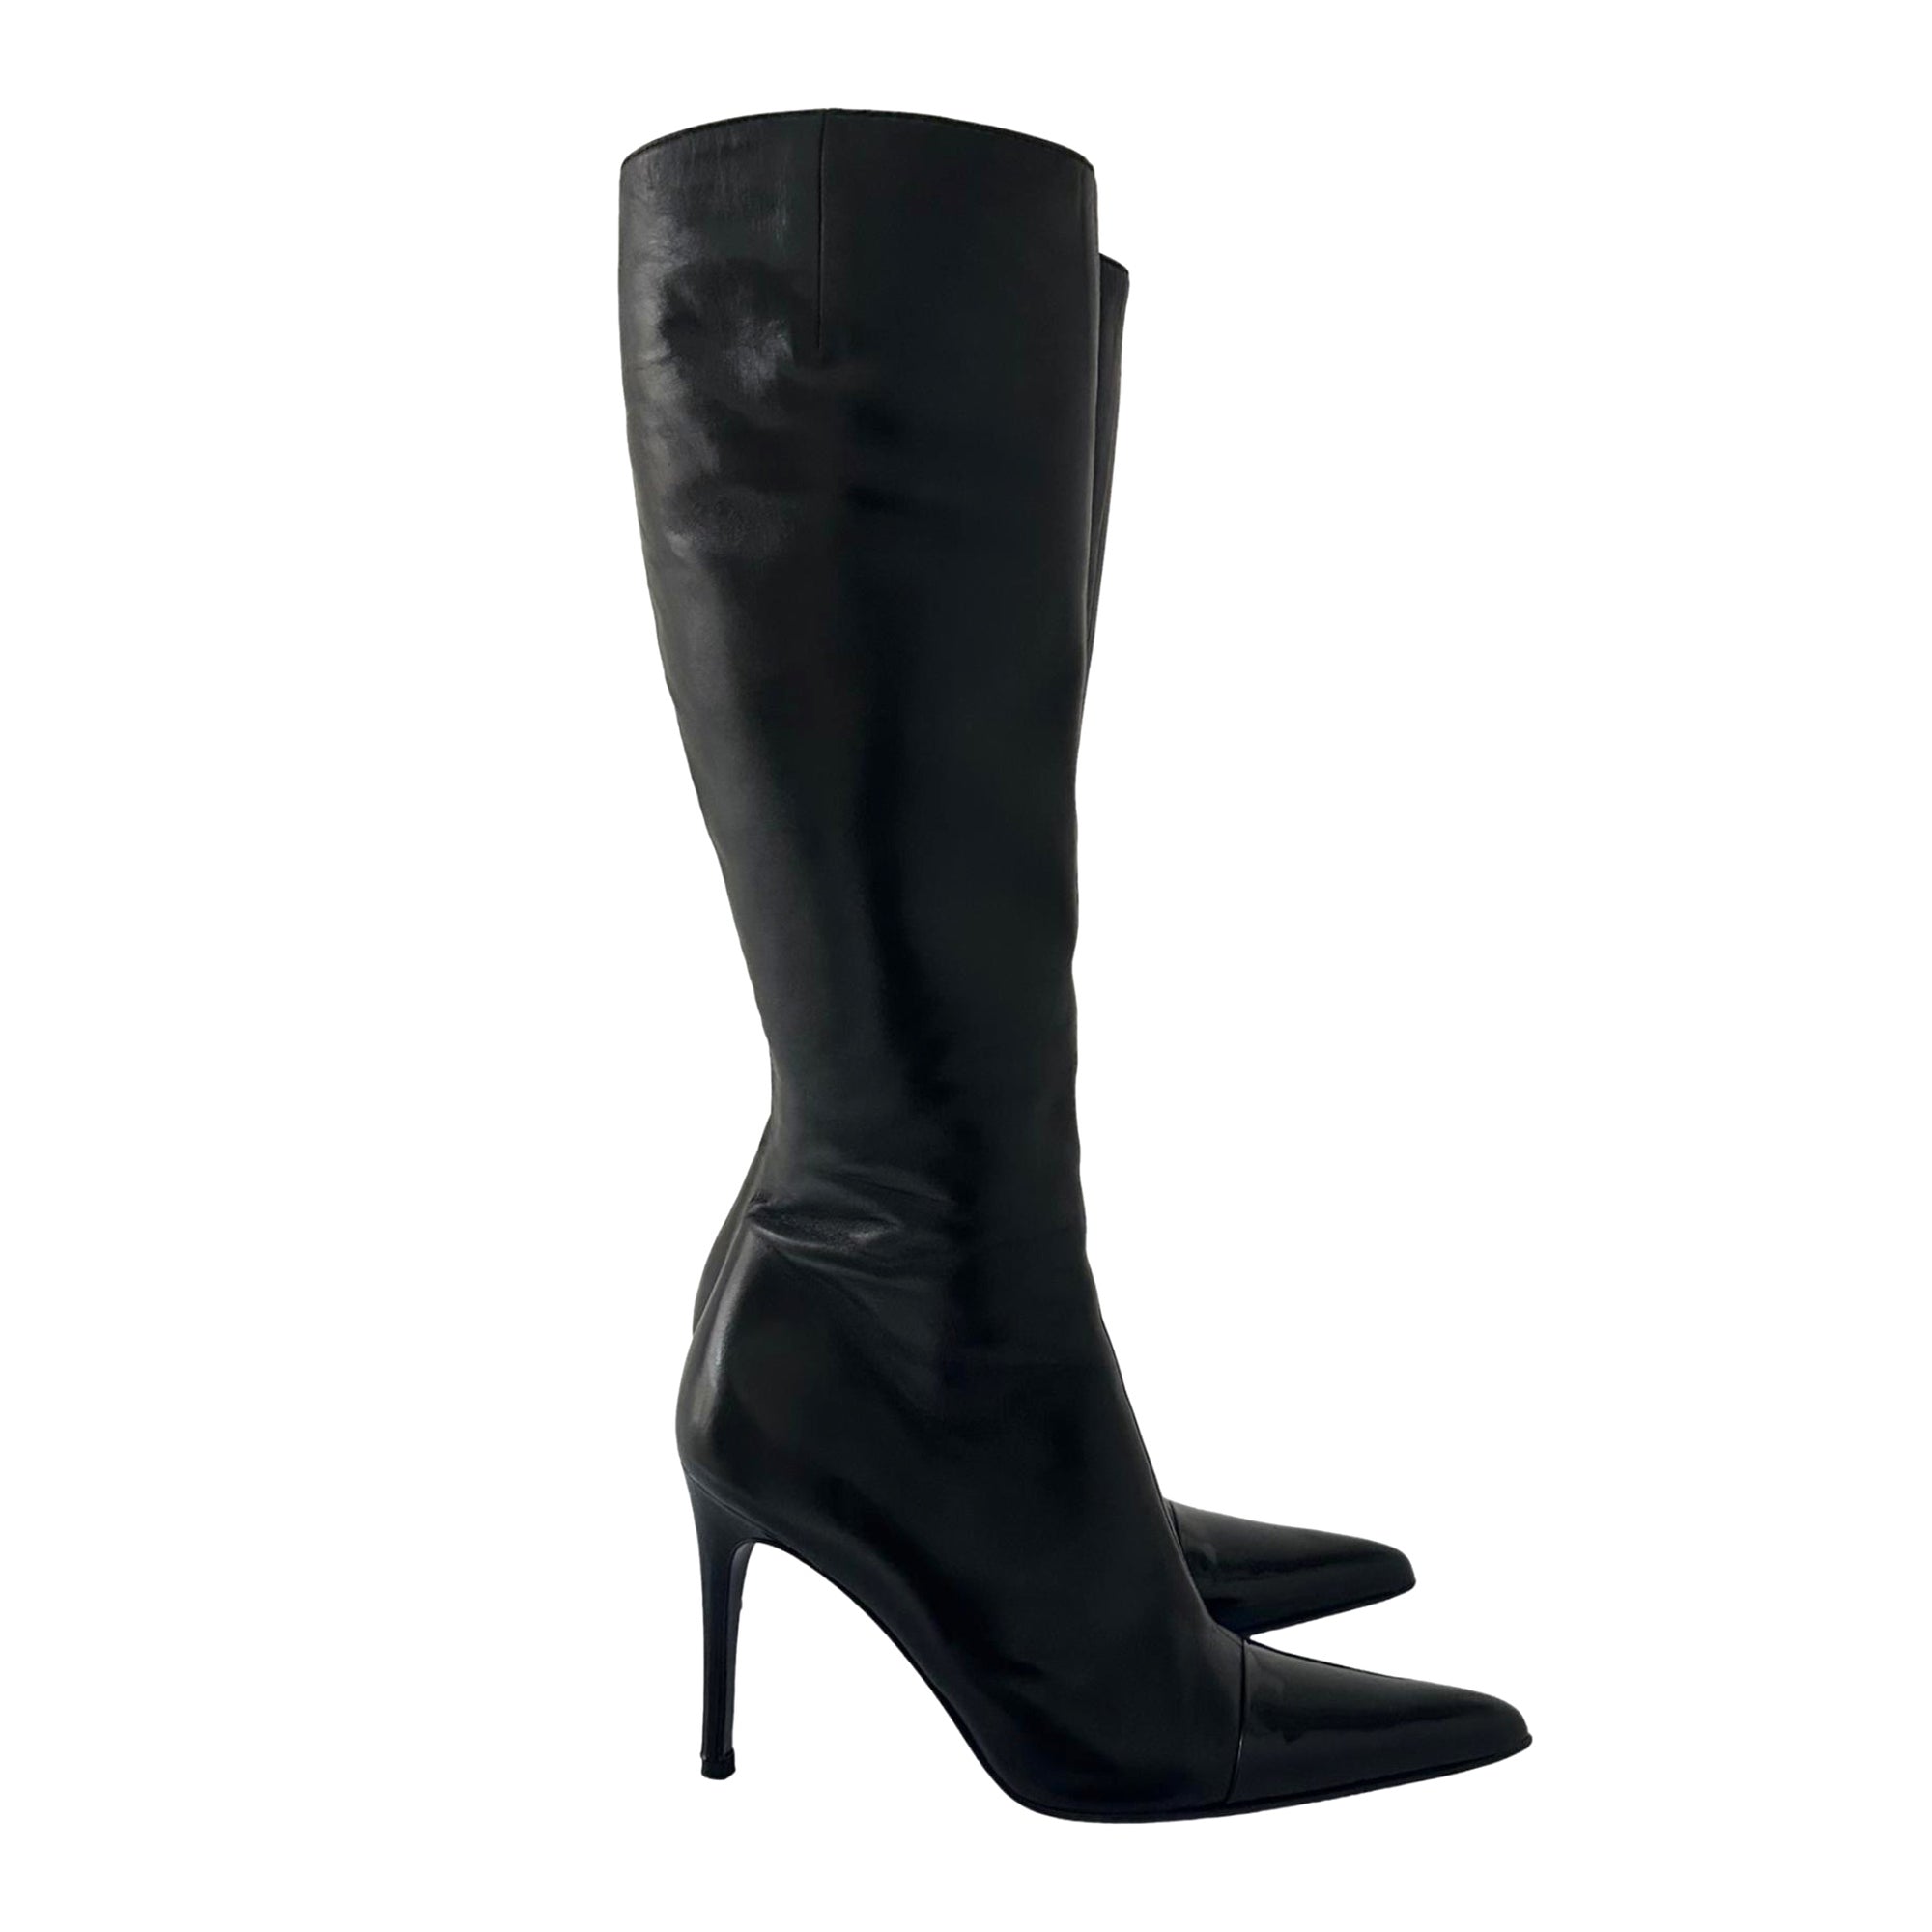 Chanel Black Leather Knee High Boots